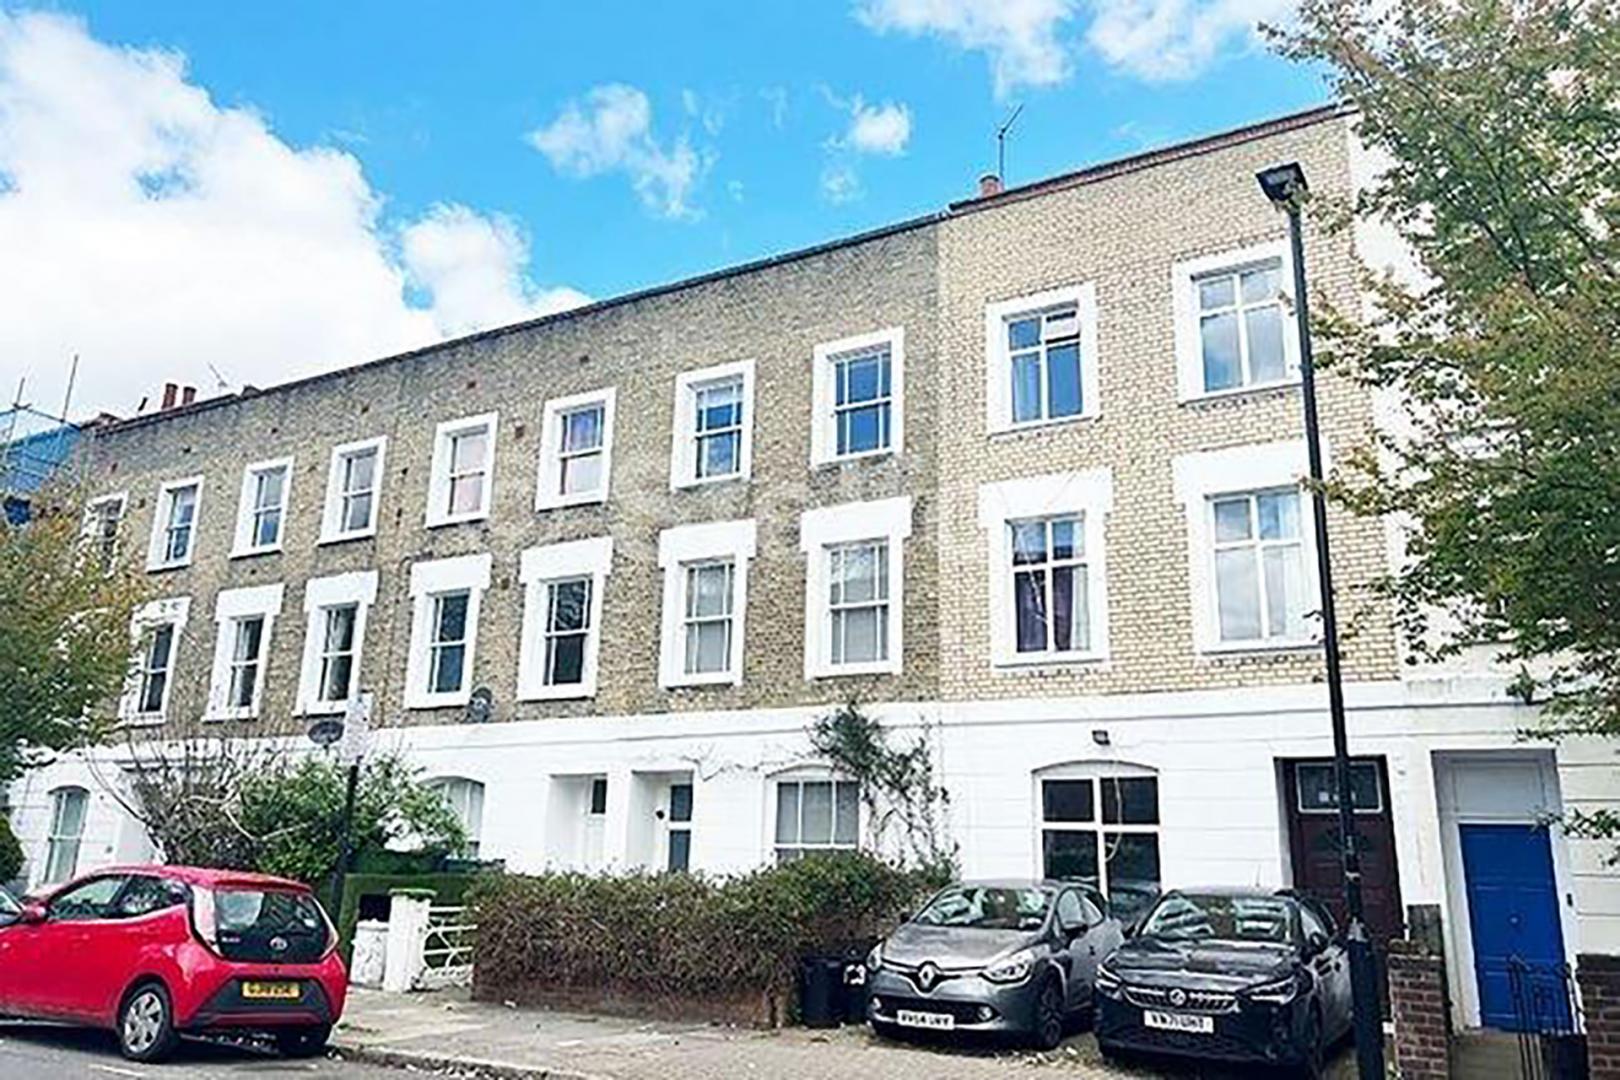 6 double bedrooms over 3 floors with 2 bathrooms mins to tube & shops Pakeman Street, Holloway